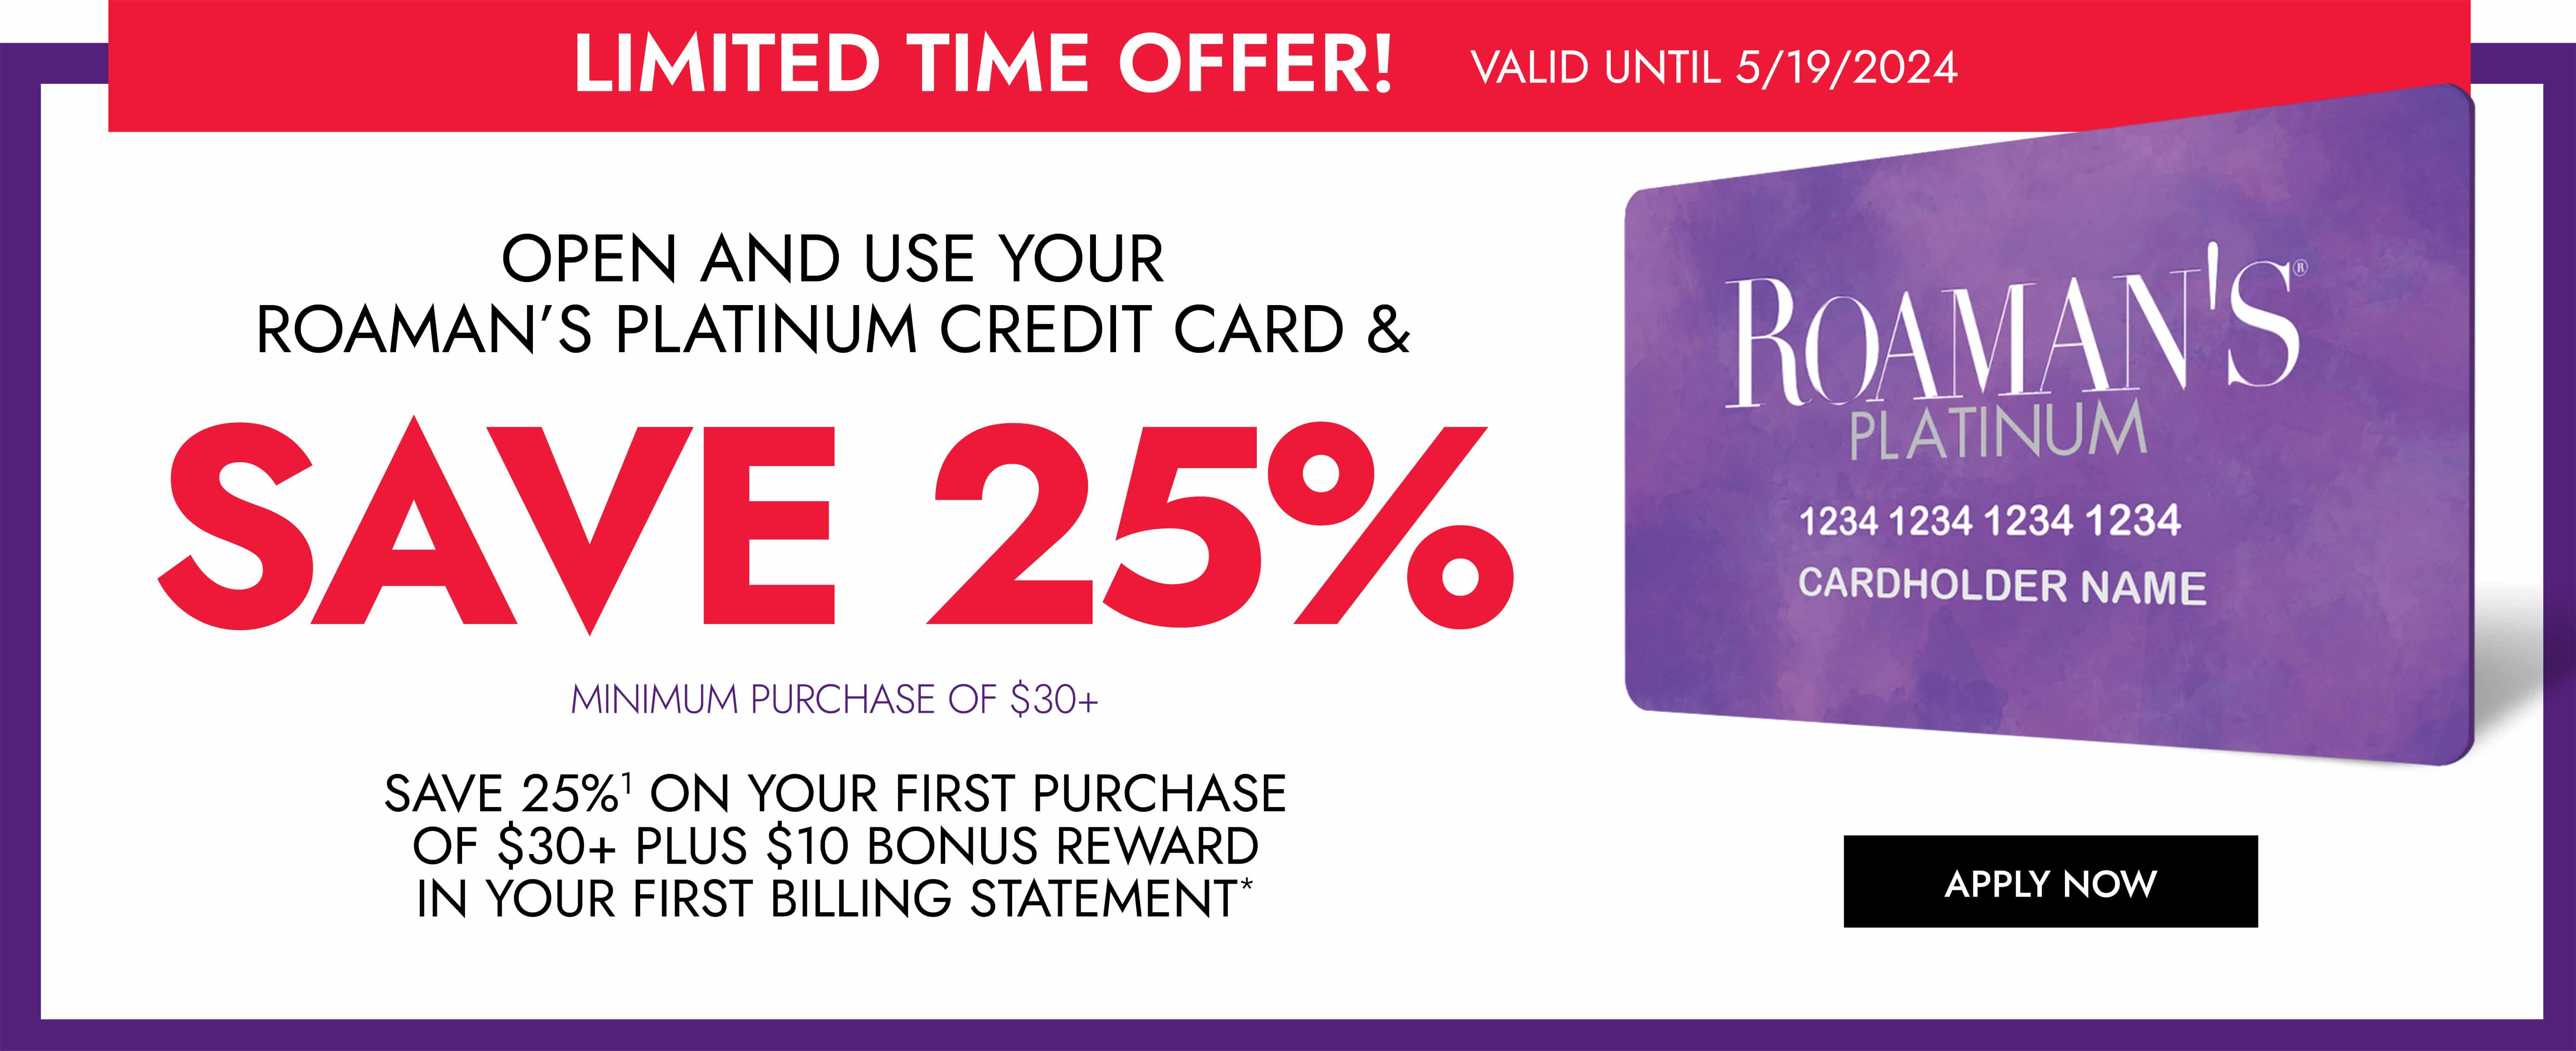 Save 25% When you open and use your Roamans platinum credit card